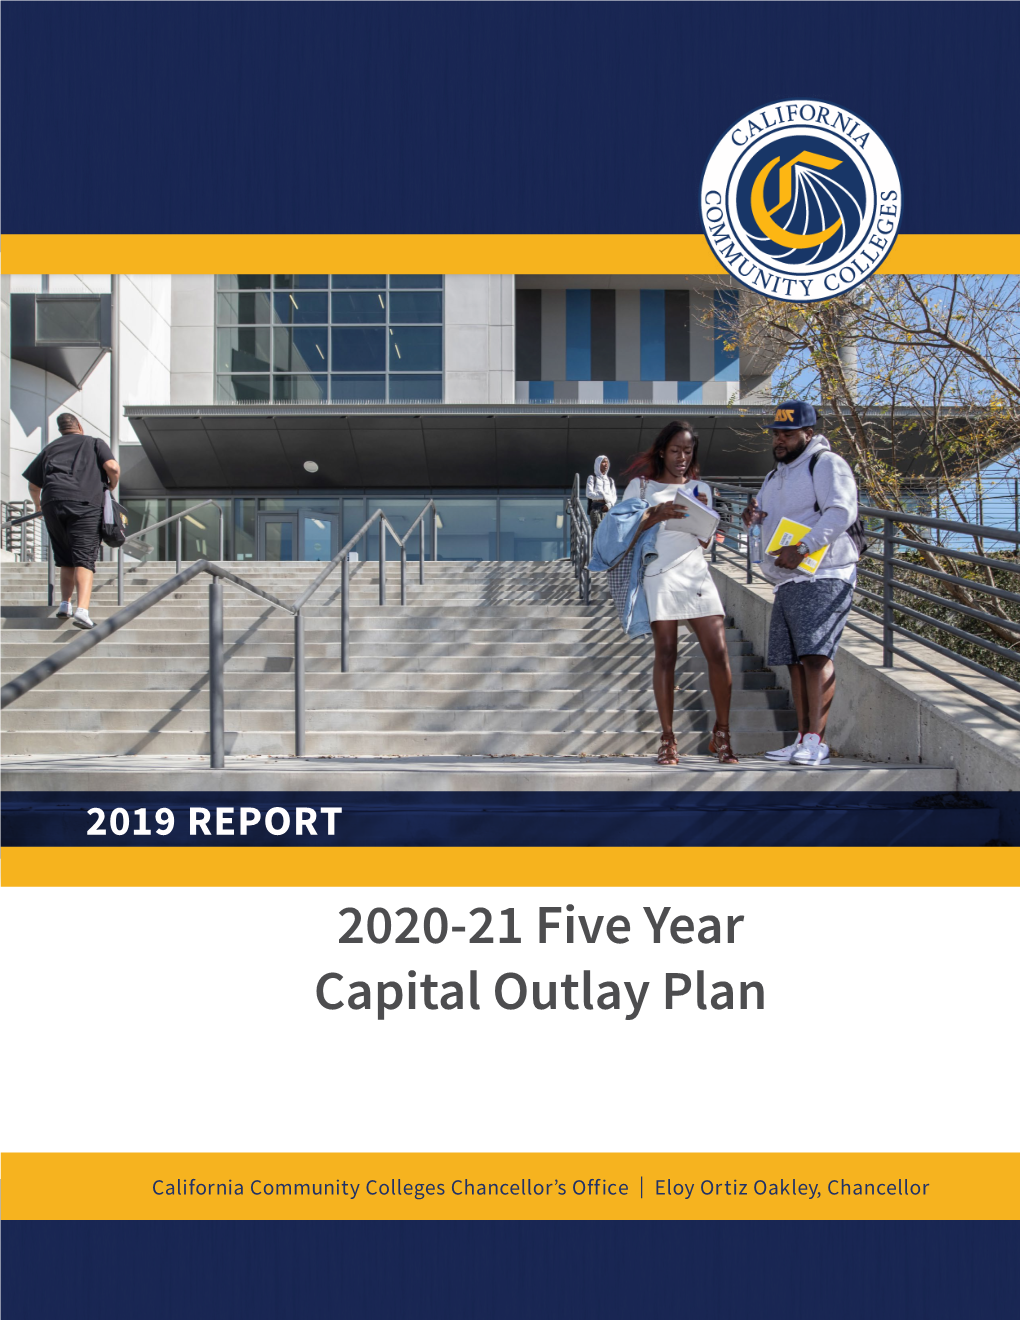 2020-21 Five Year Capital Outlay Plan